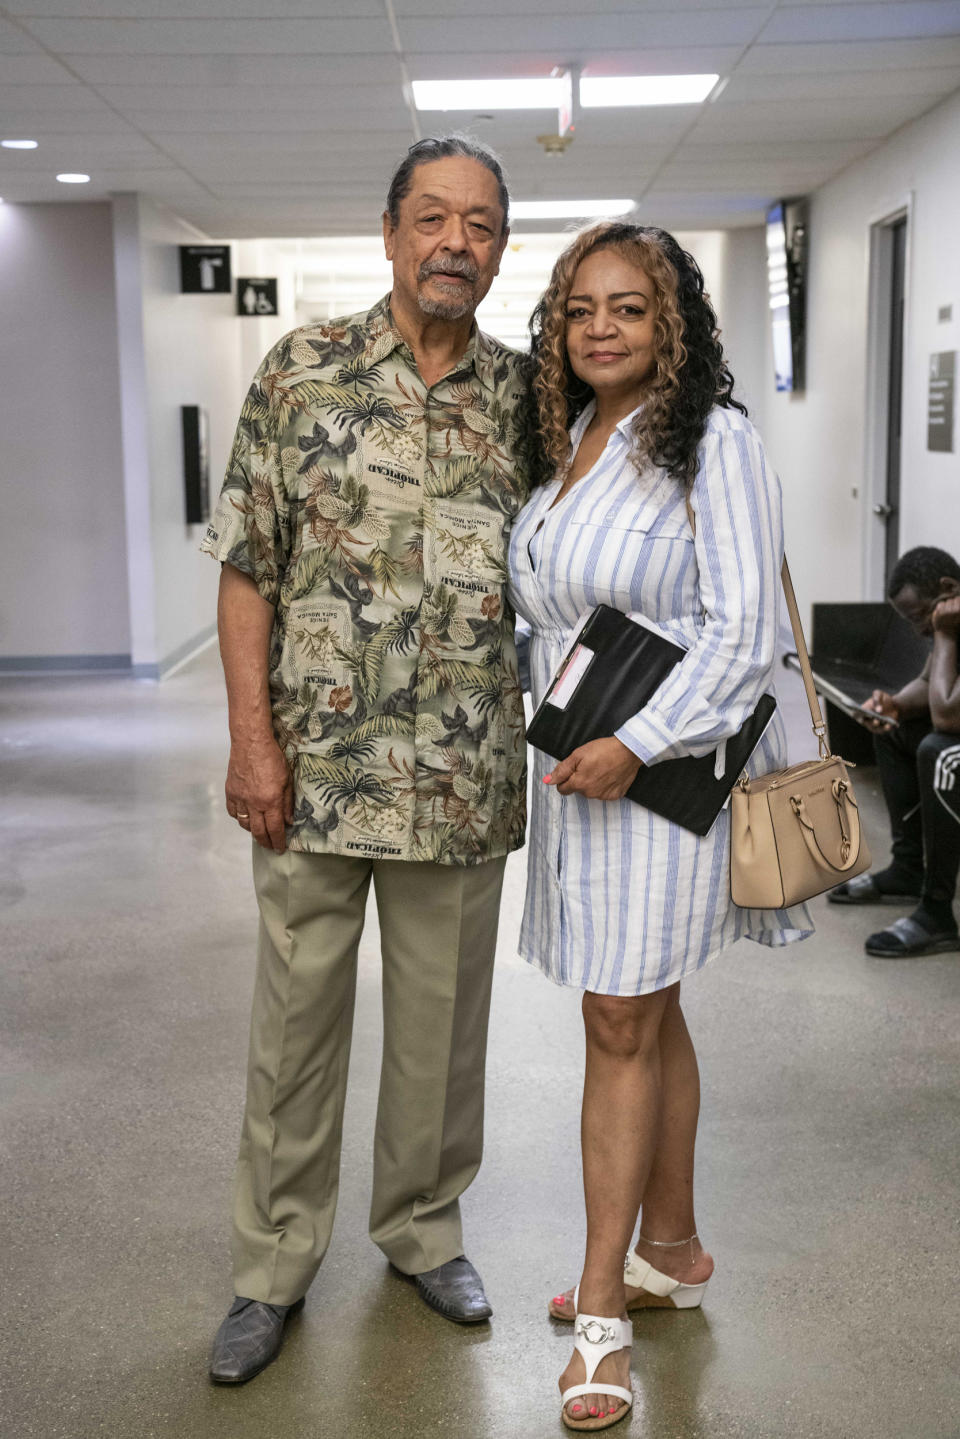 Landlords Sequoia (right) and Milton Ferguson after their case was heard at housing court in the 36th District Court in Detroit on June 5, 2023. (Sarah Rice for NBC News)